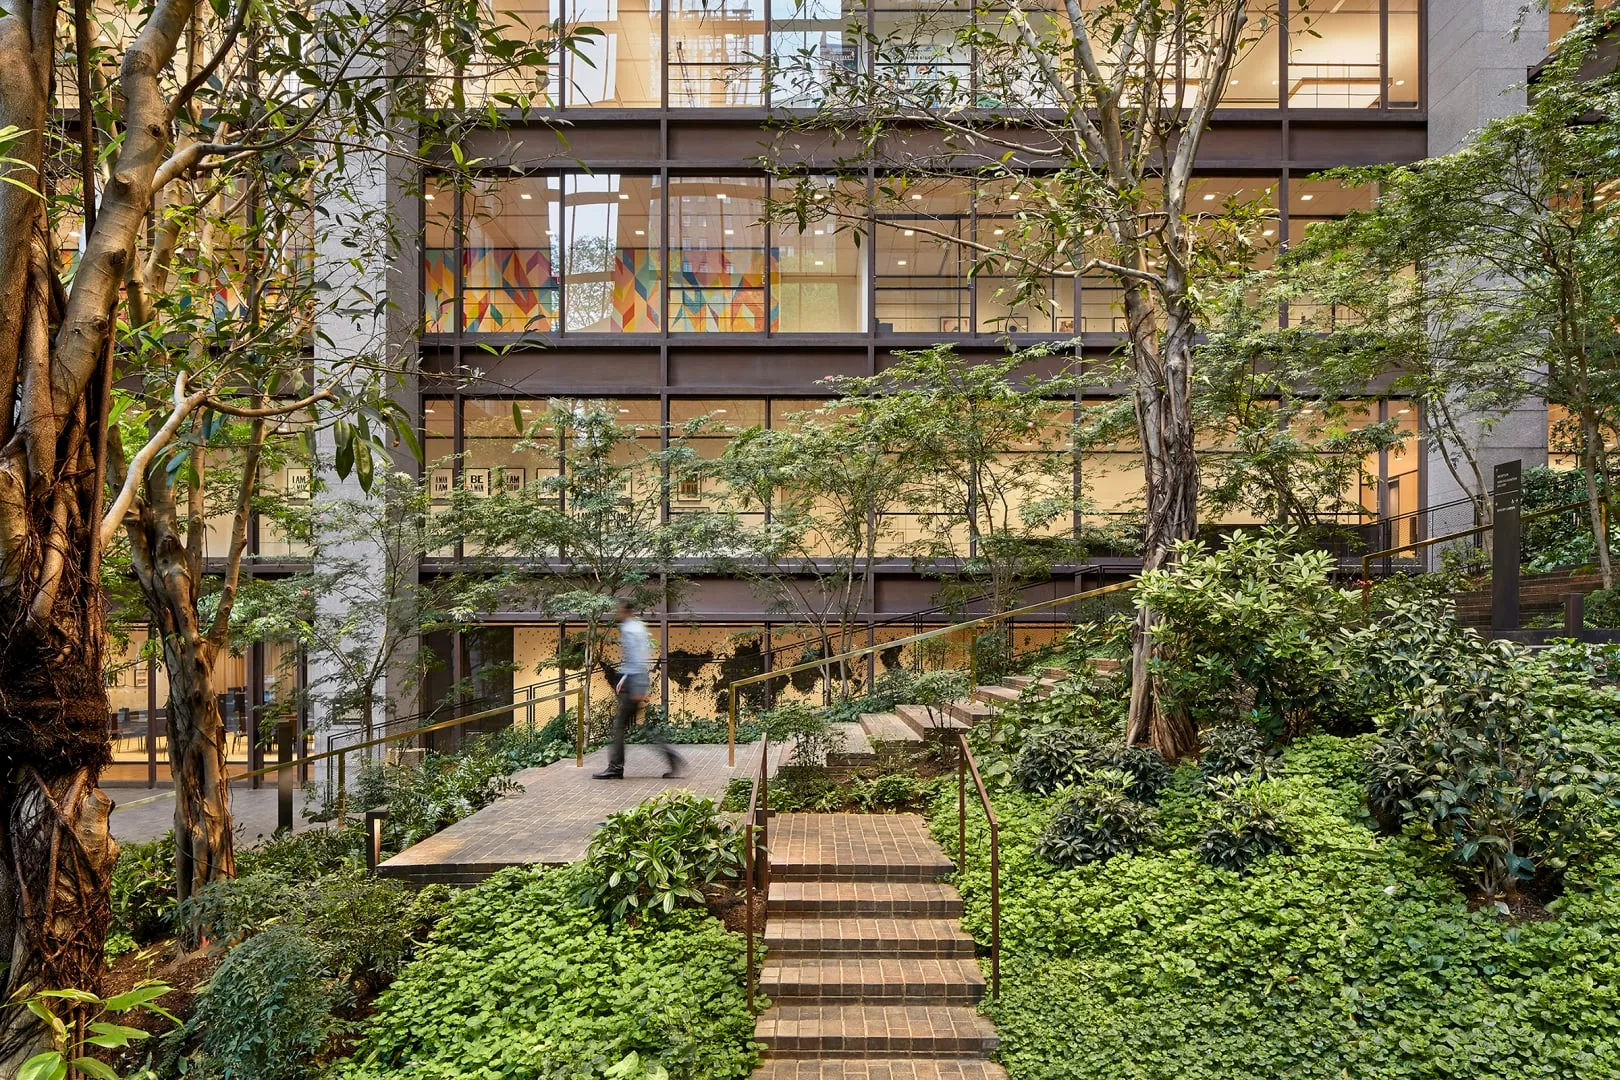 The Ford Foundation Center for Social Justice